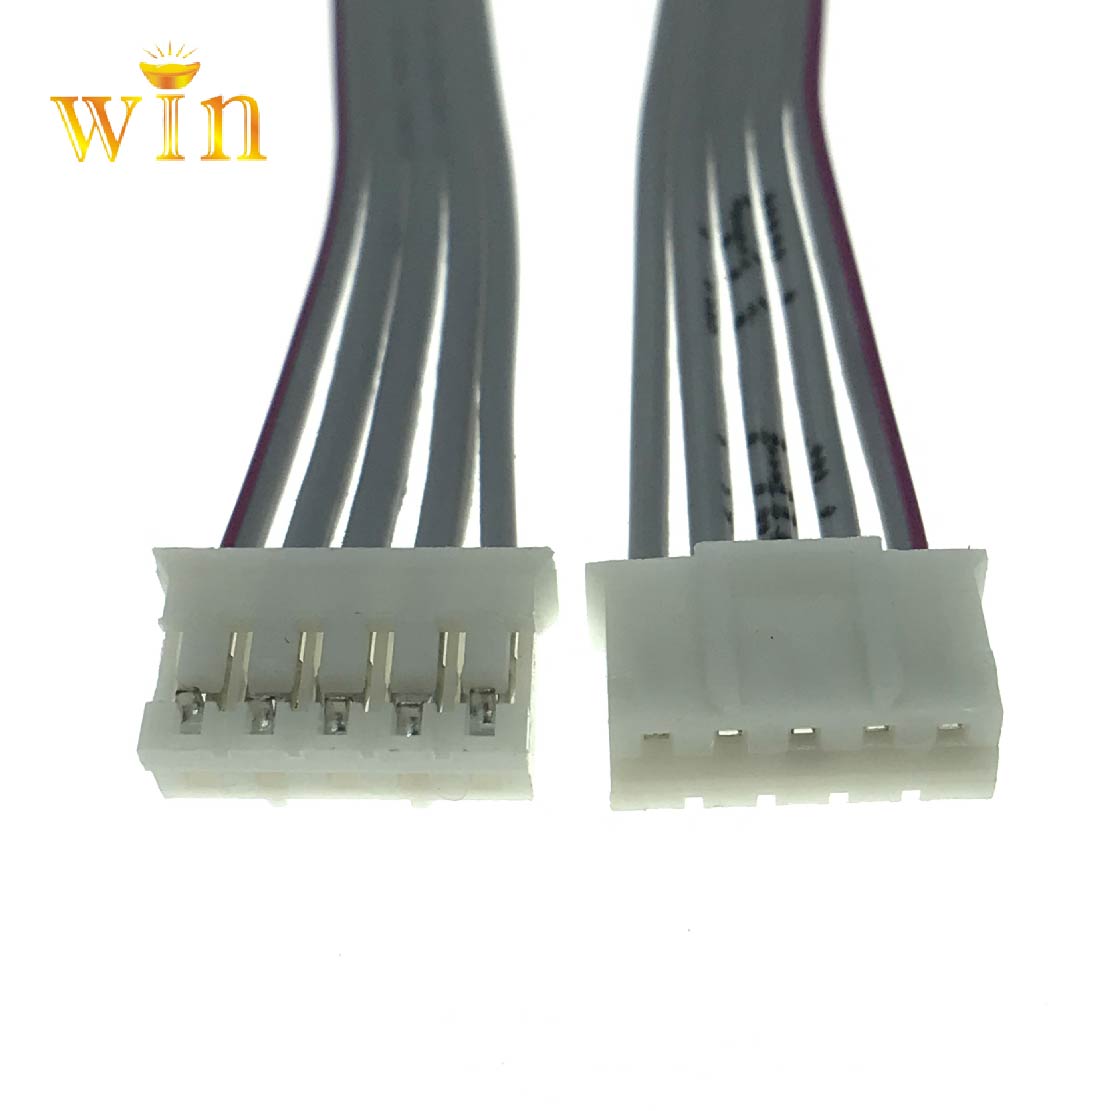 Cable series pair with wafer connectors different dimensions optional